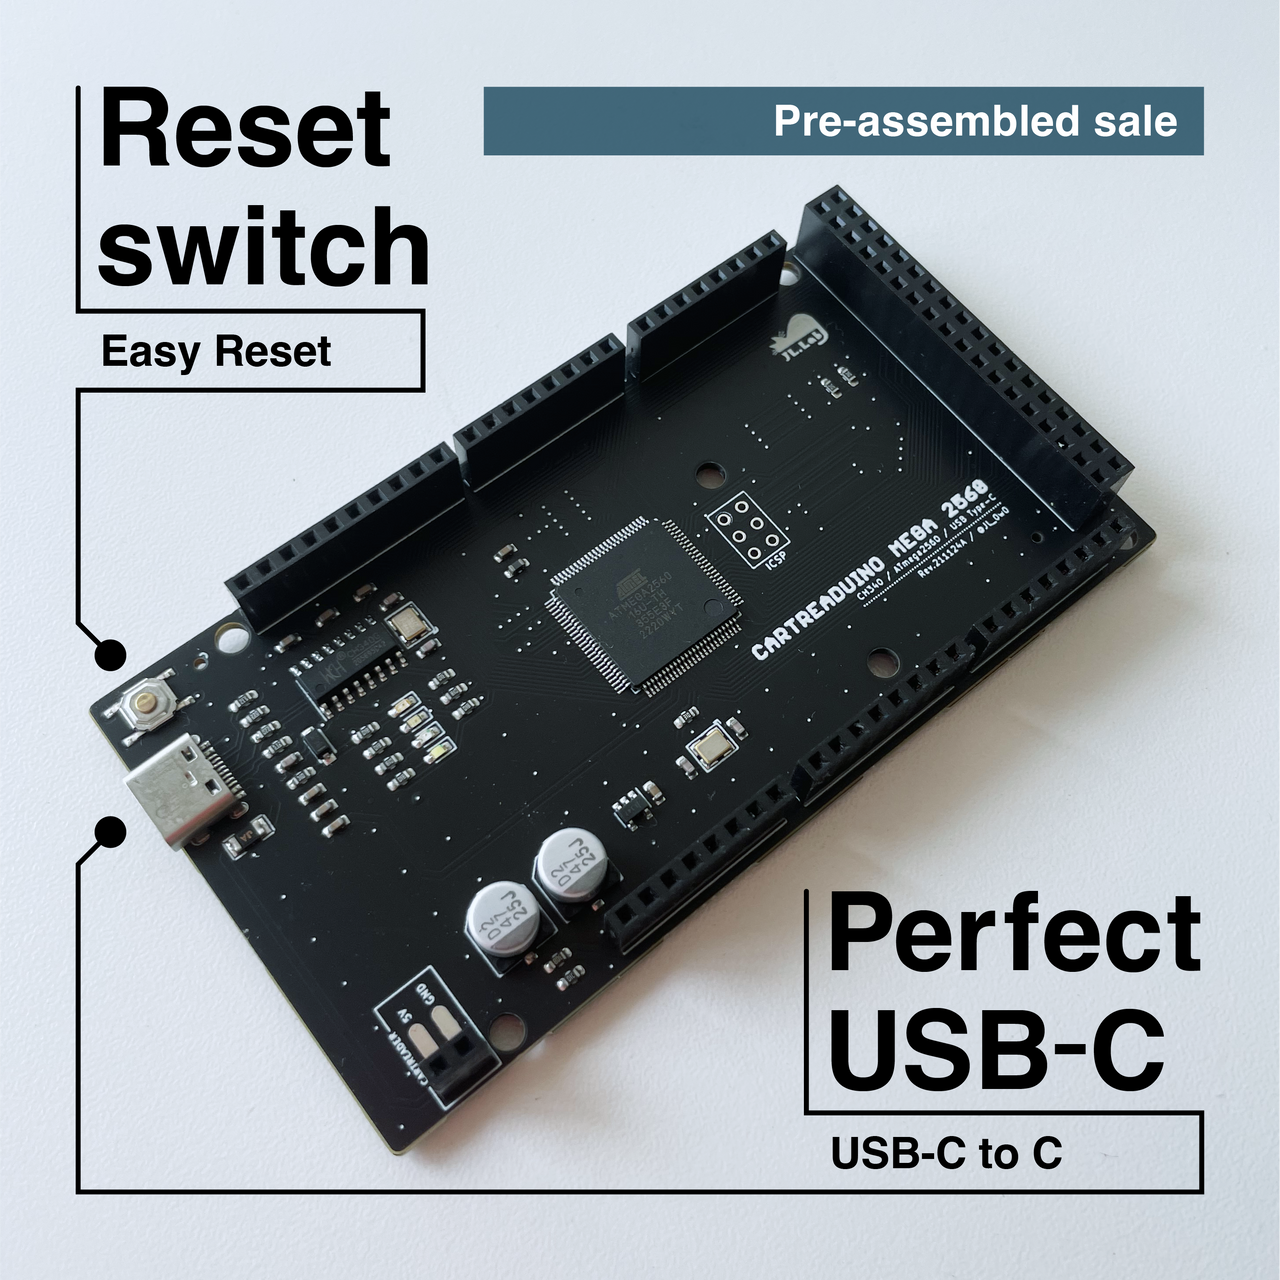 Perfect USB-C Arduino Mega *Only with Cartridge Reader V3-ALTER build service